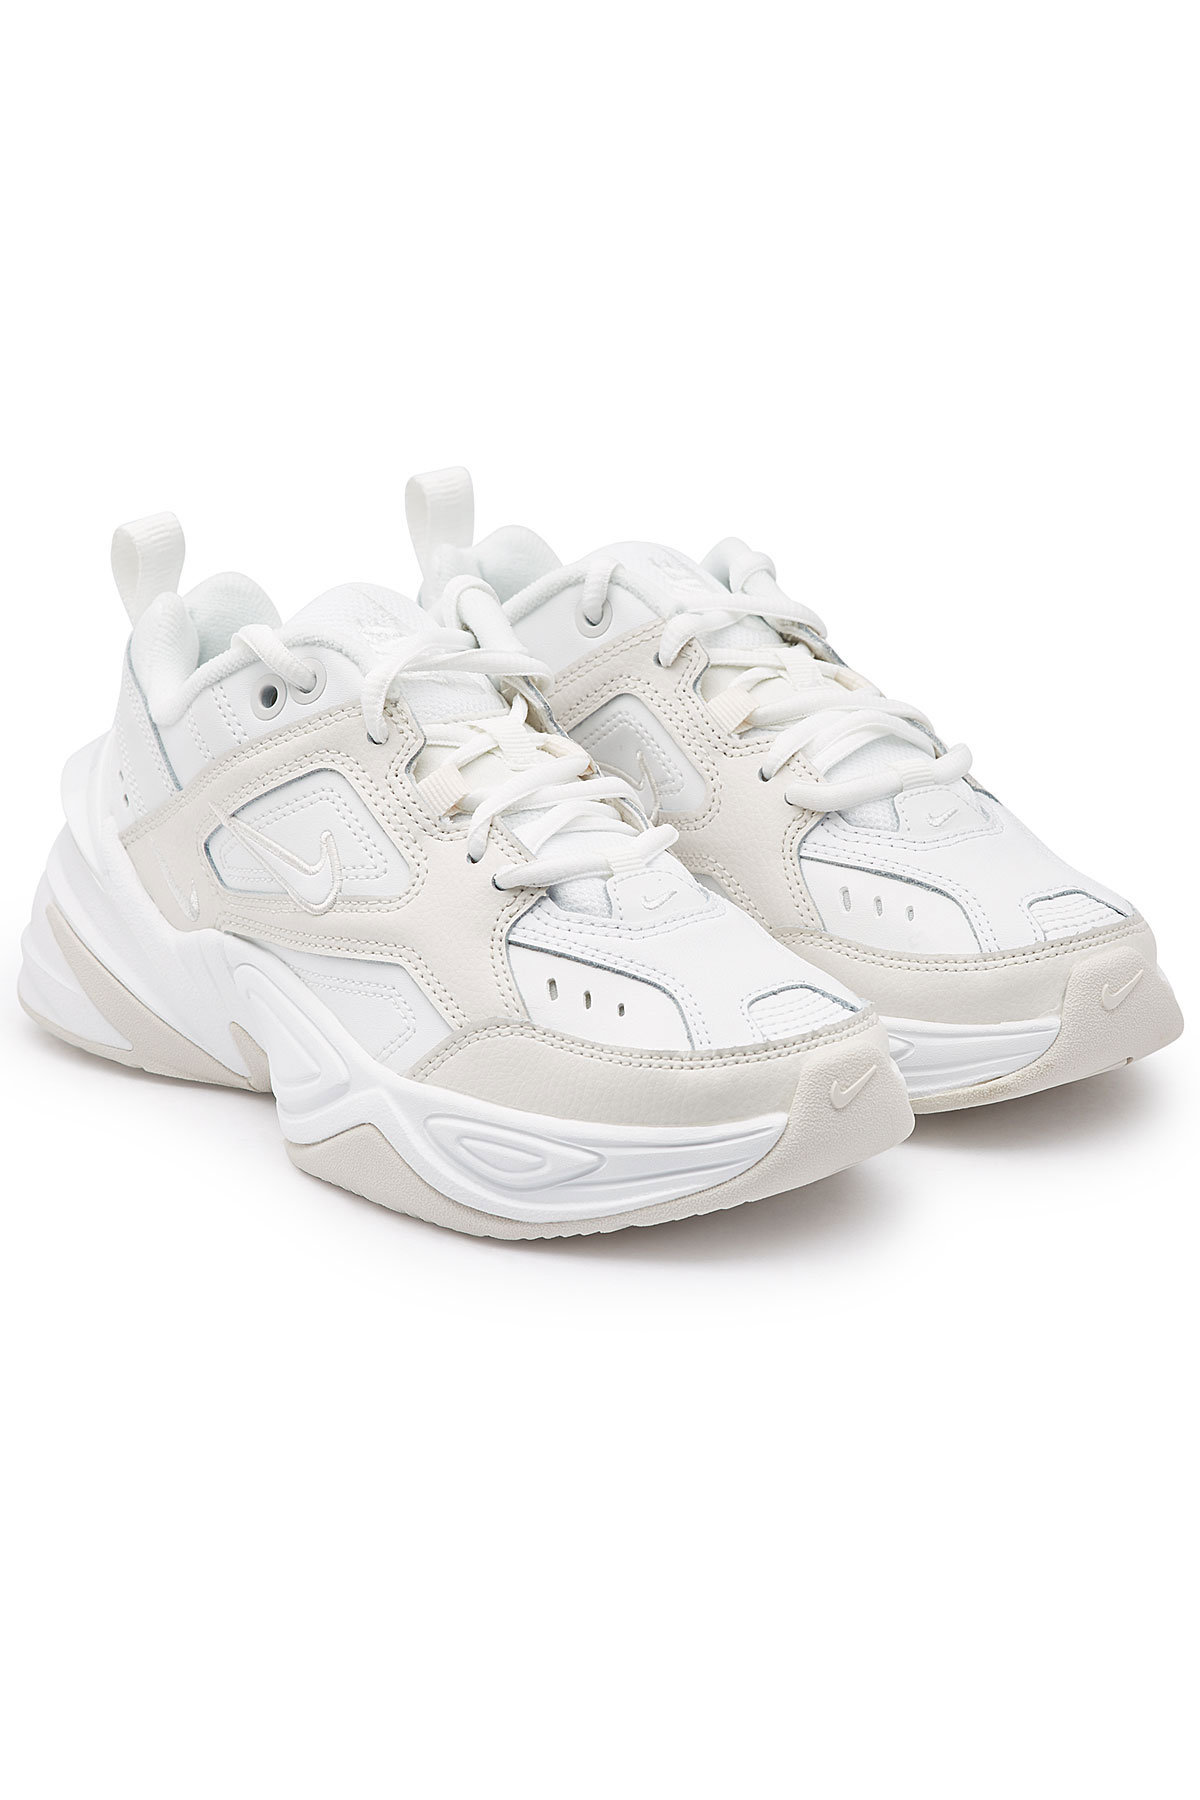 m2k tekno sneakers with leather